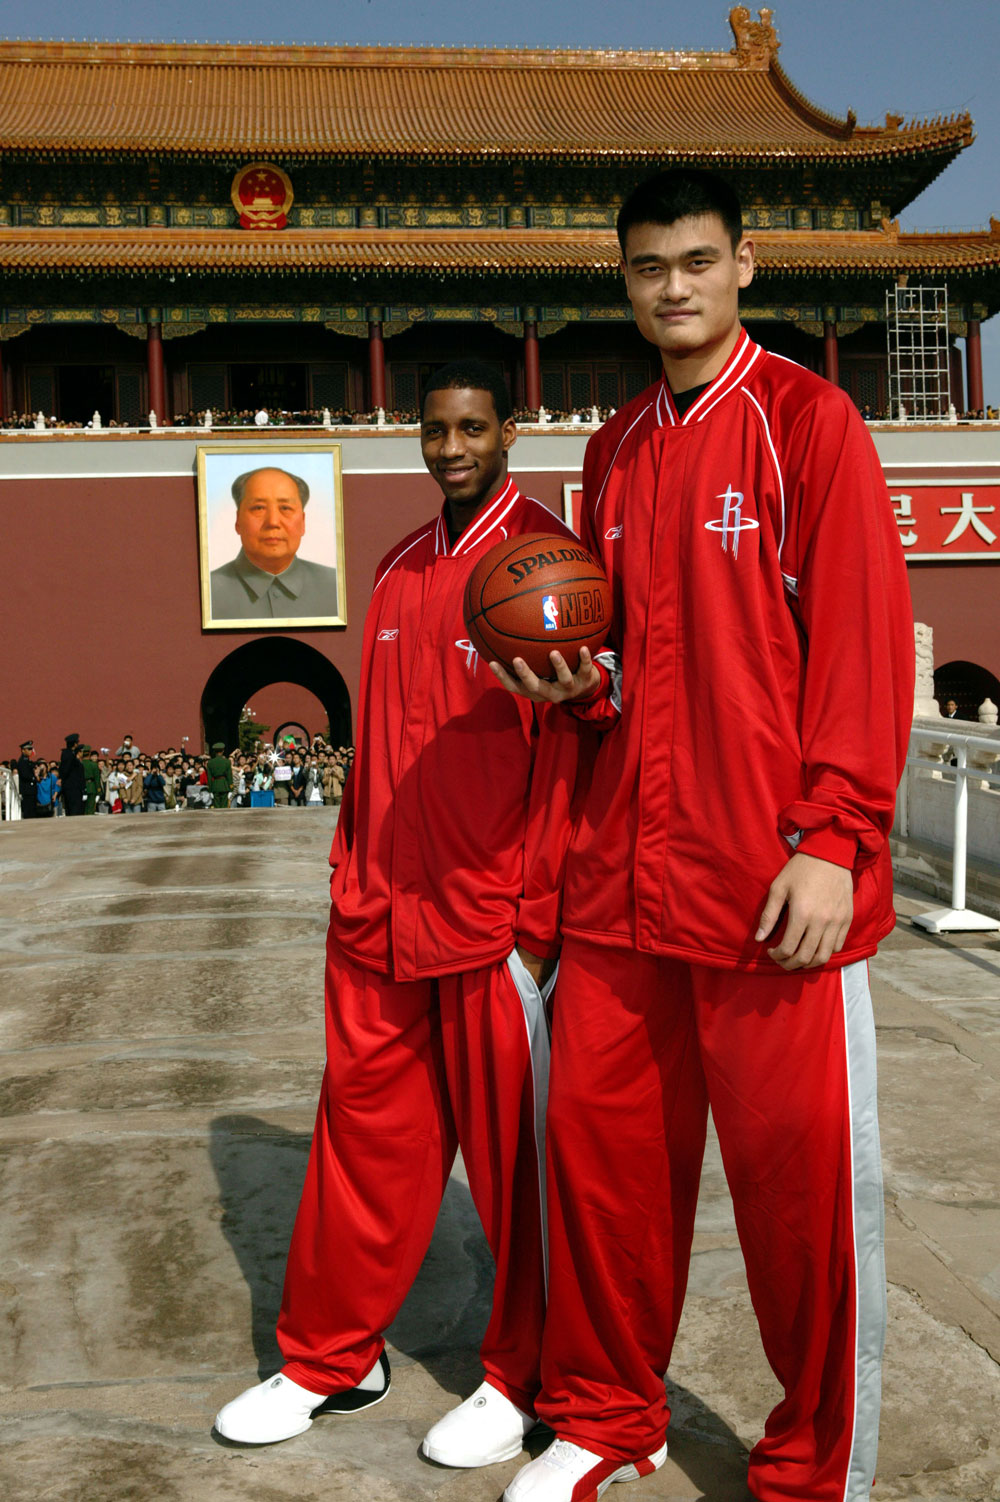 Yao Ming and Tracy McGrady of the Houston Rockets visit Beijing in 2004